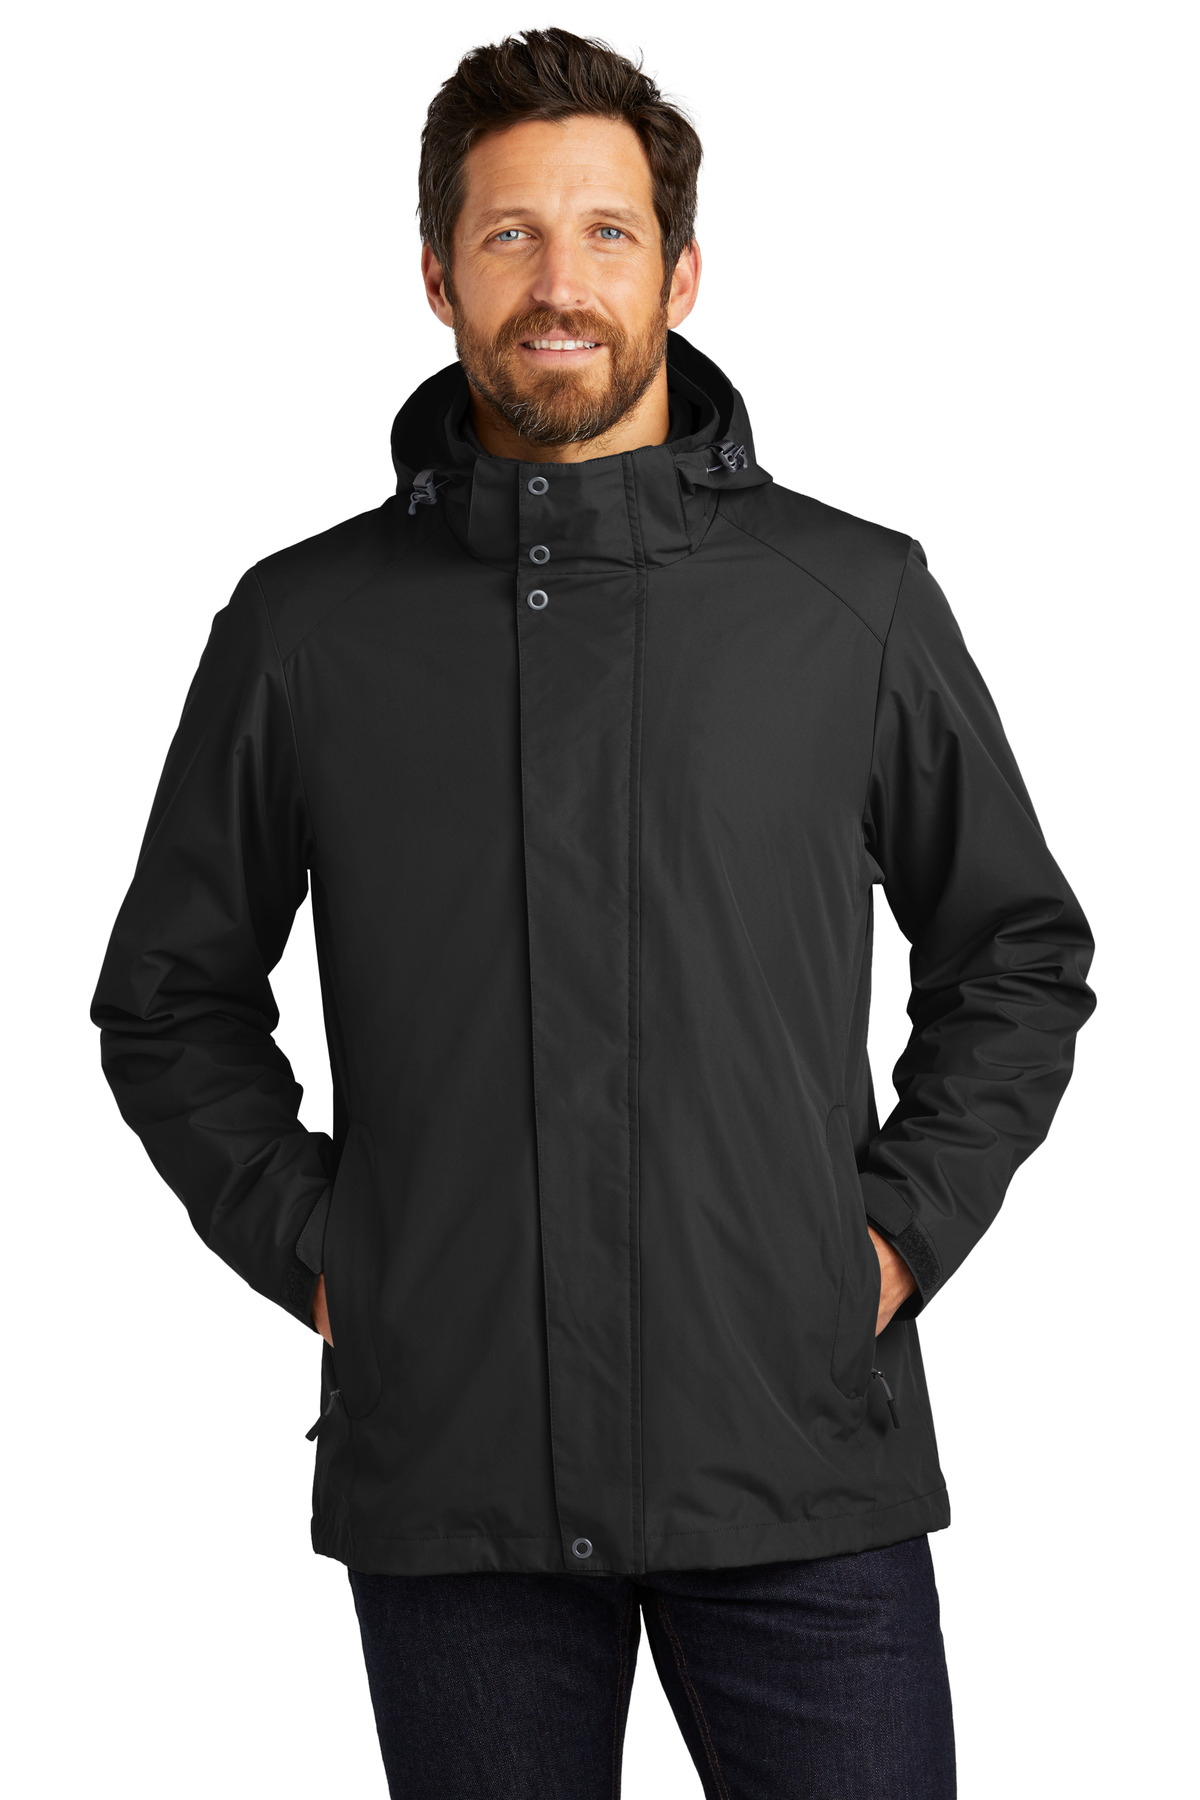 Port Authority All-Weather 3-in-1 Jacket-Port Authority